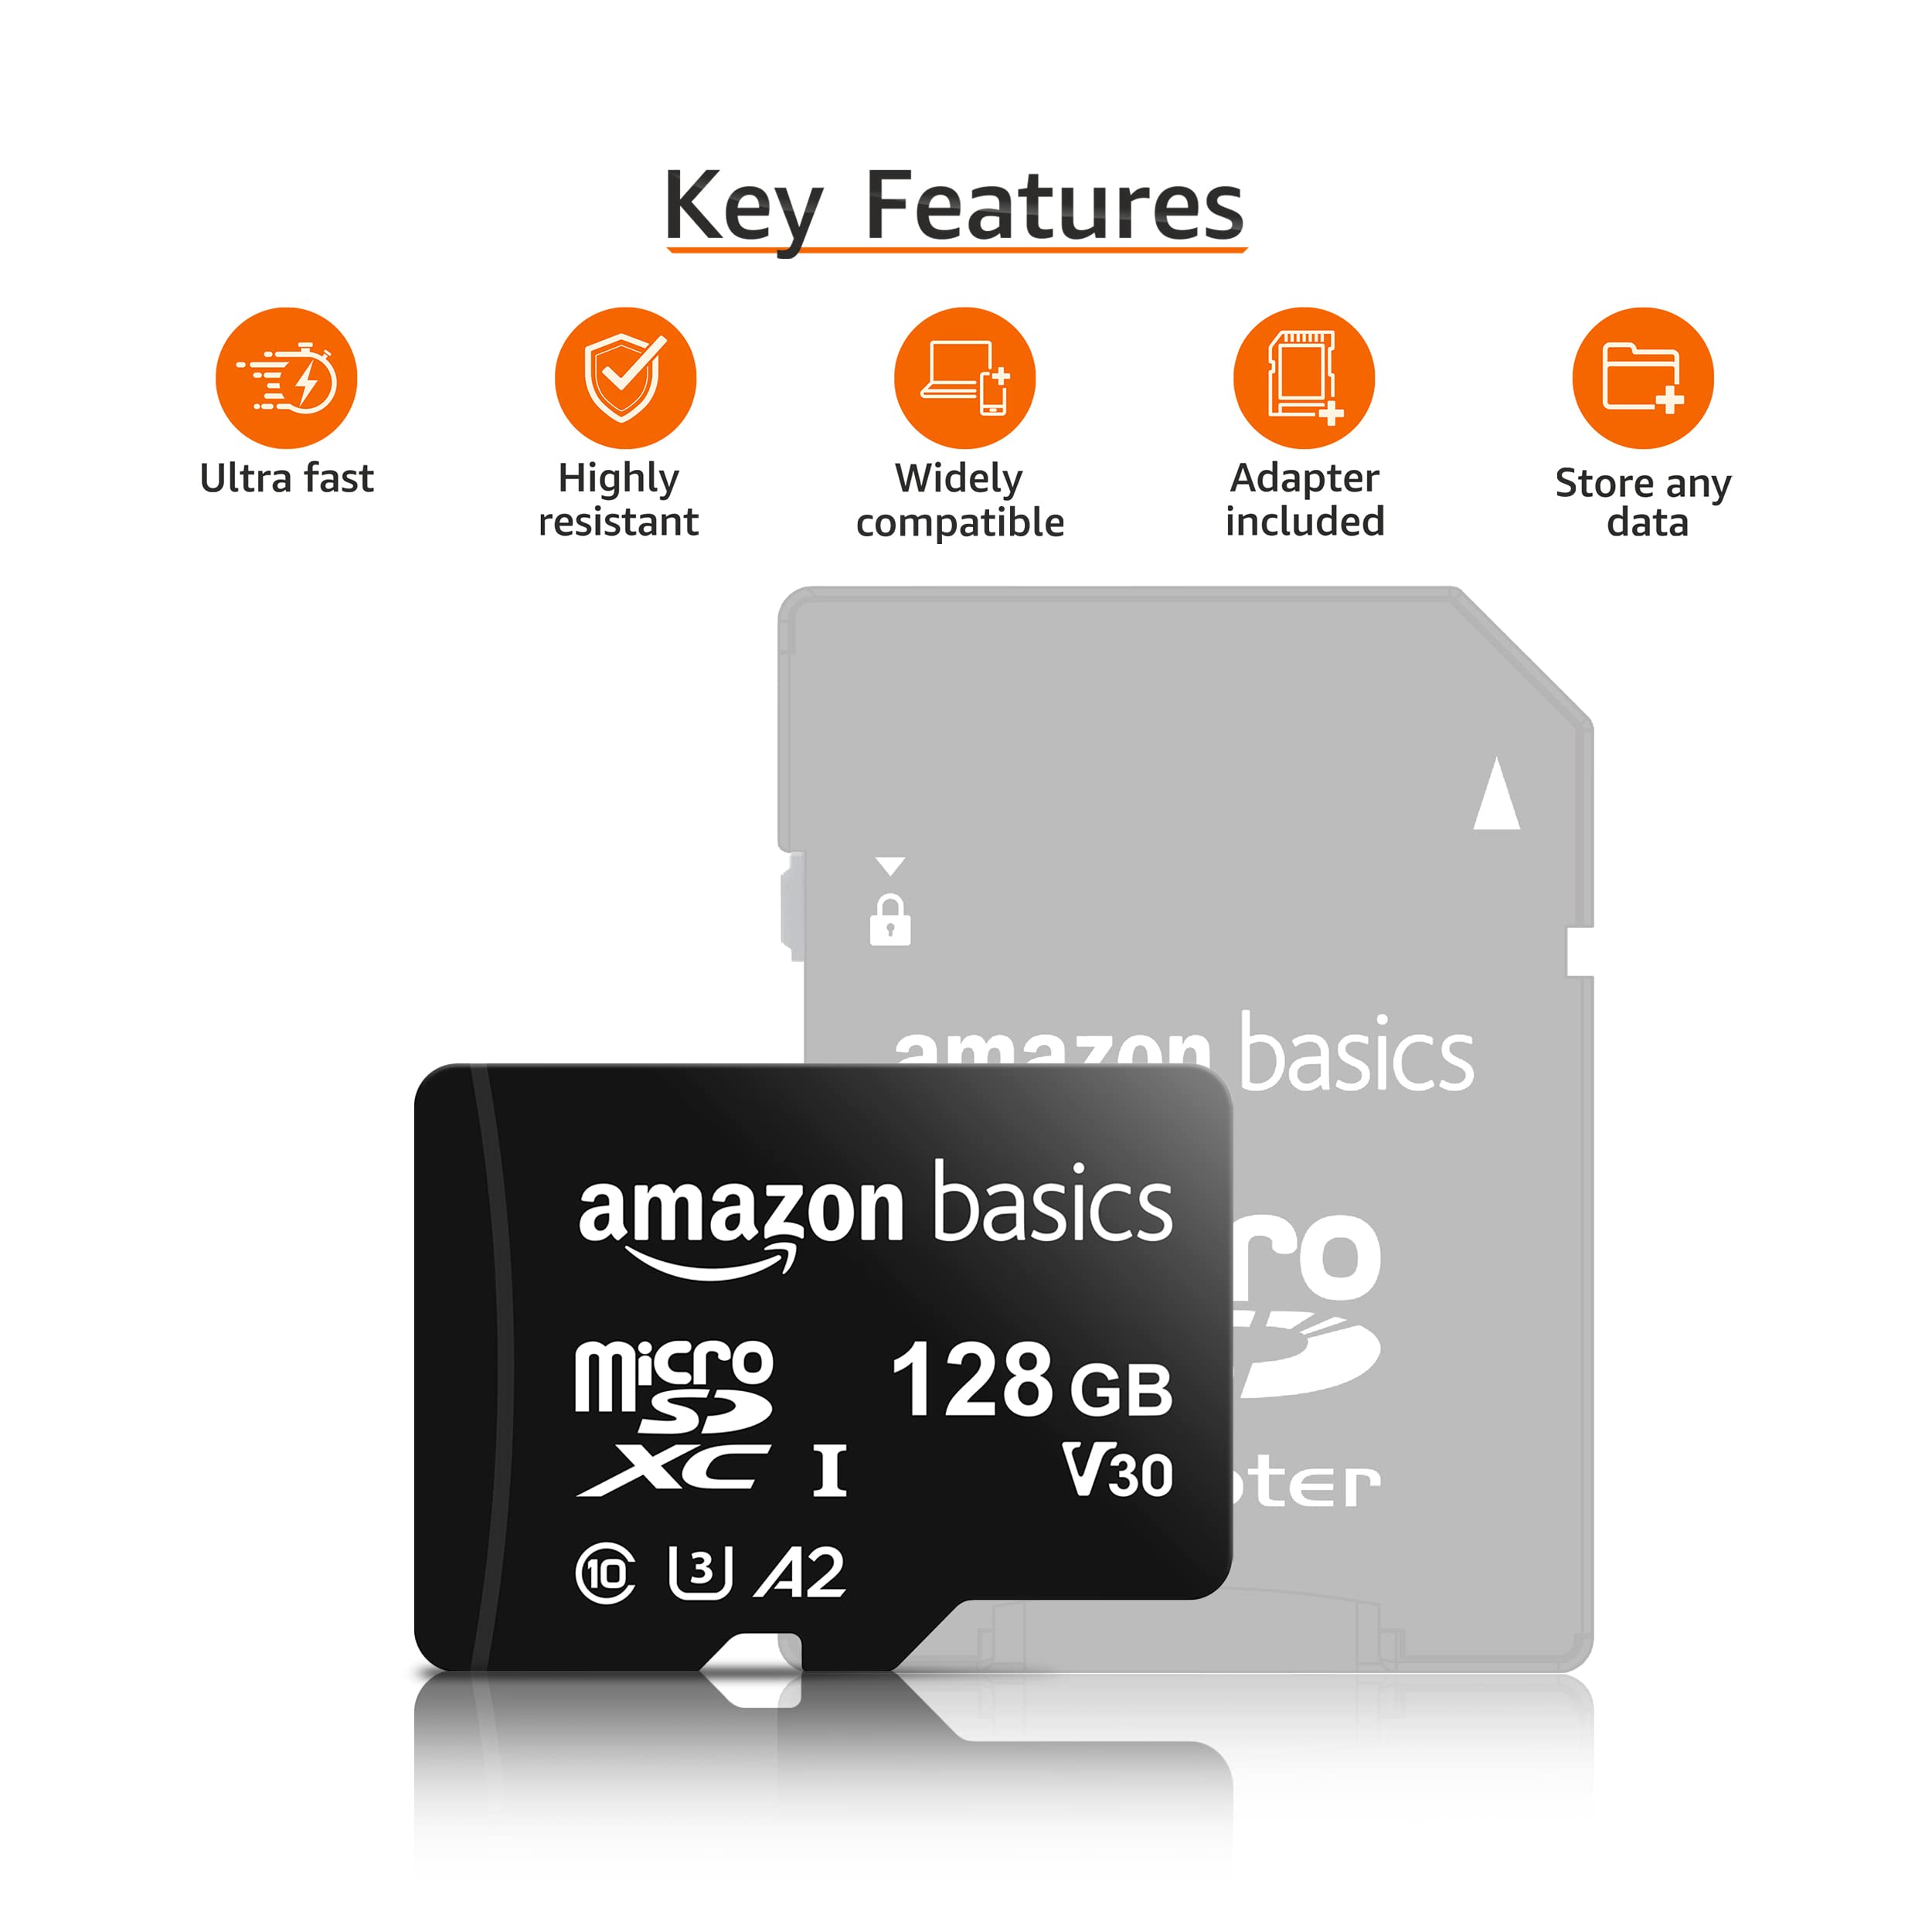 Amazon Basics microSDXC Memory Card with Full Size Adapter, A2, U3, Read Speed up to 100 MB/s, 128 GB, Black